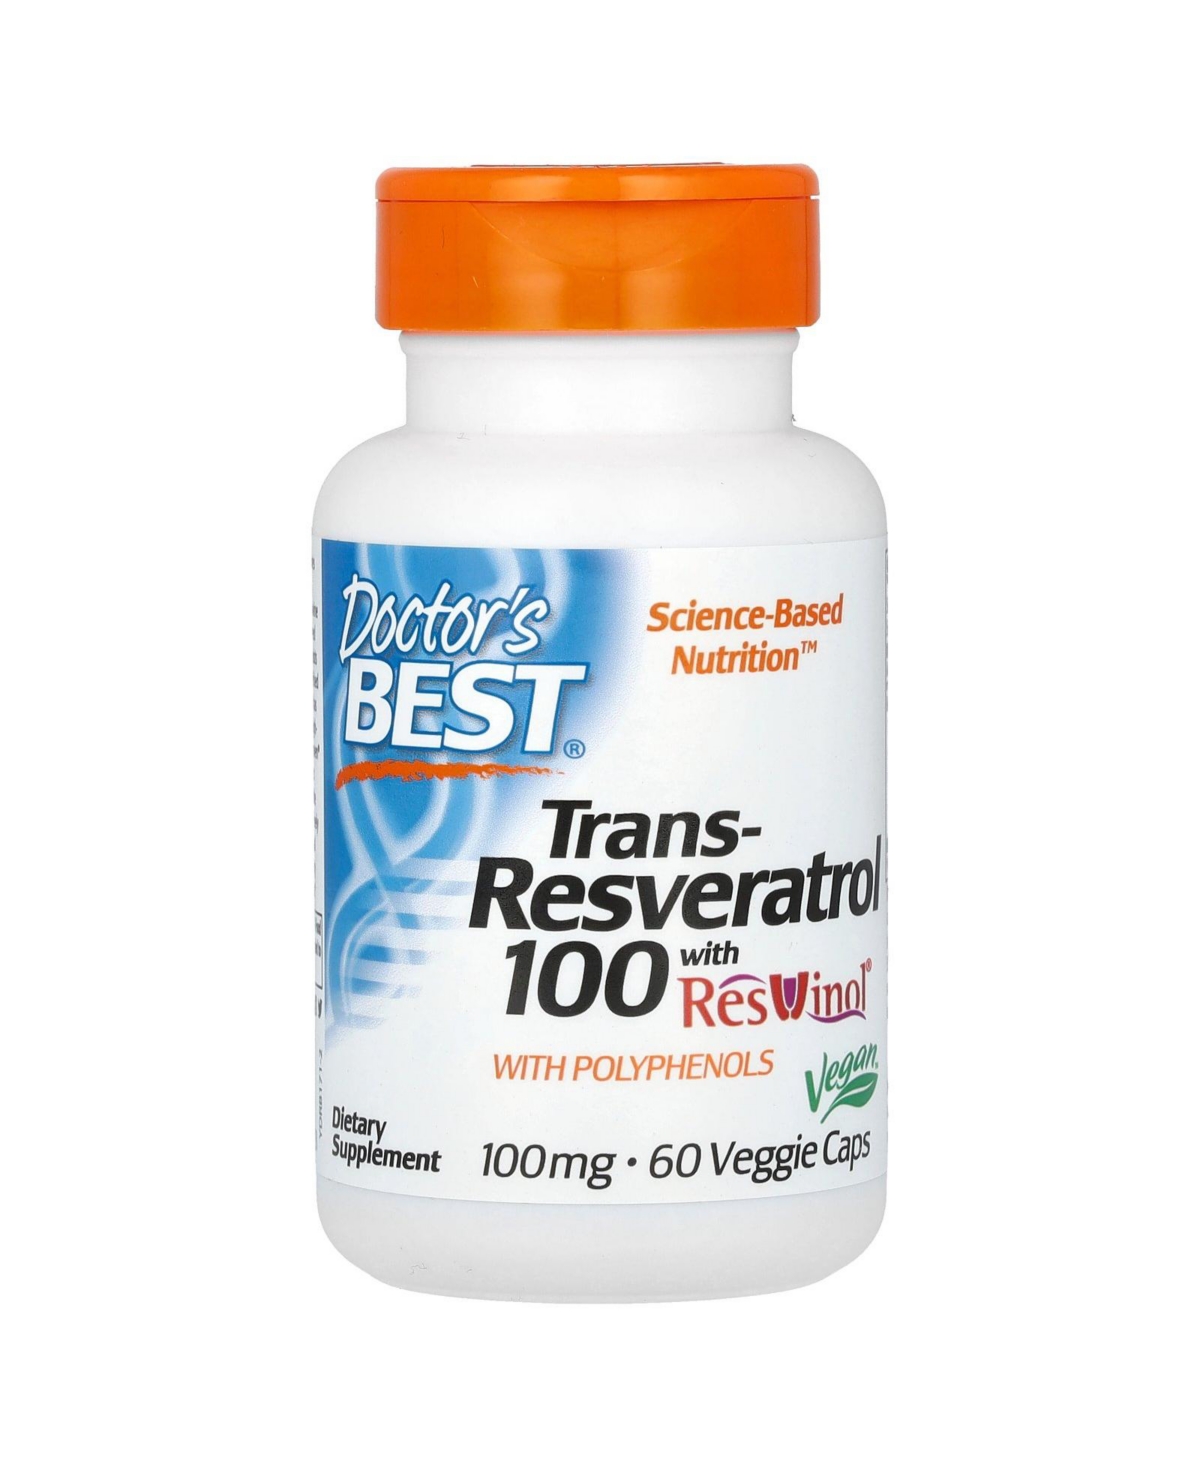 Trans-Resveratrol 100 with ResVinol 100 mg - 60 Veggie Caps - Assorted Pre-pack (See Table